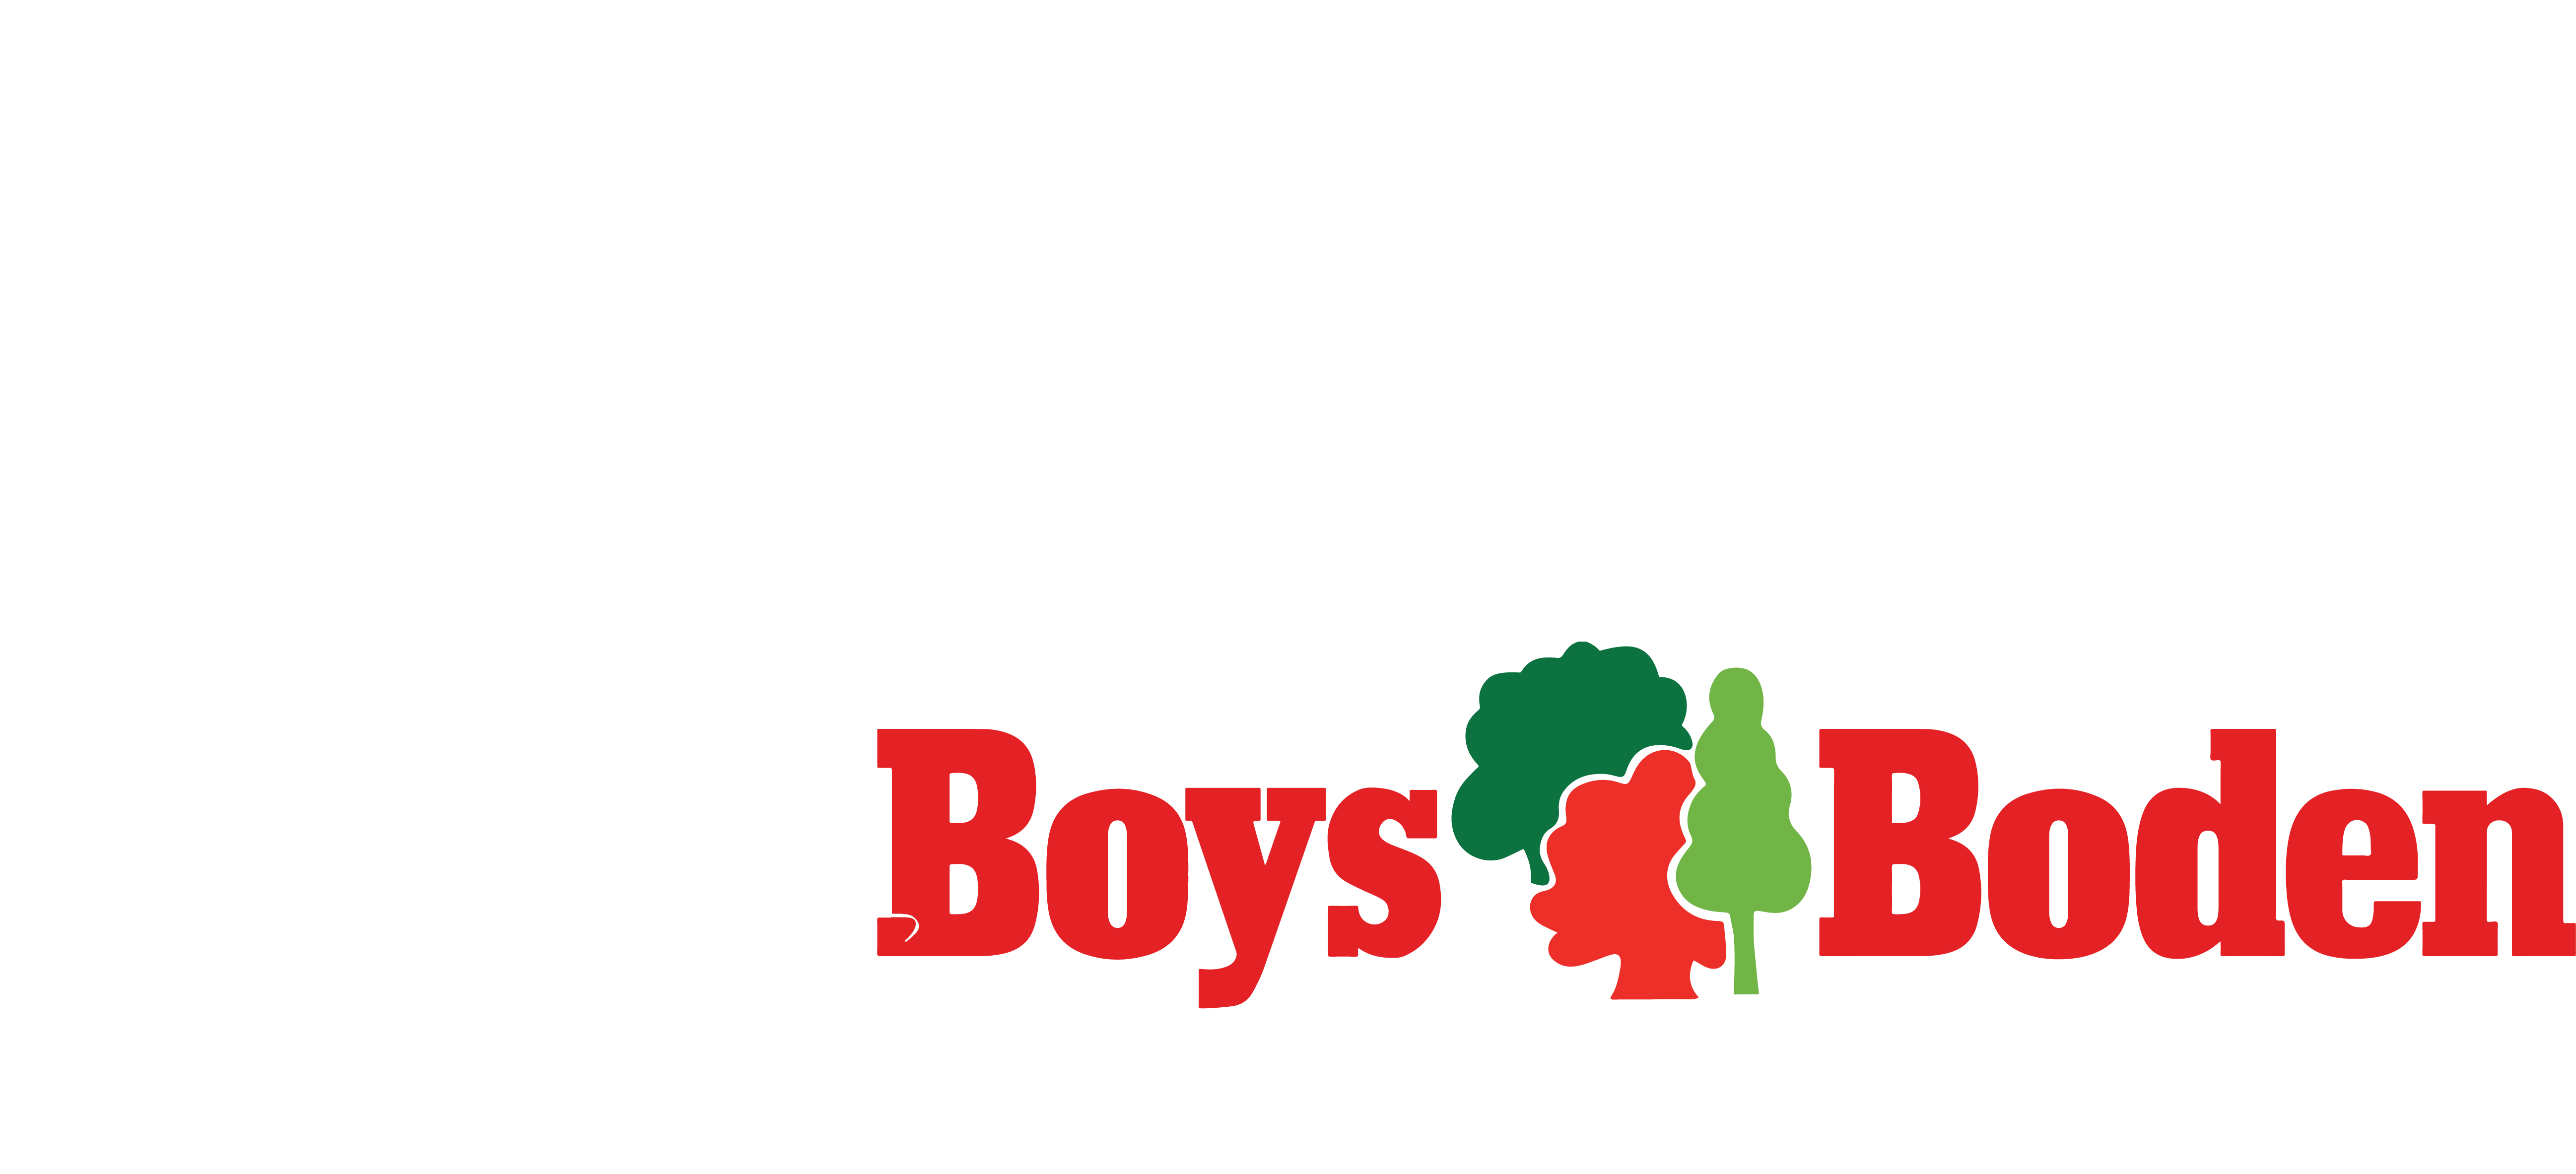 Kitchens by Boys and Boden